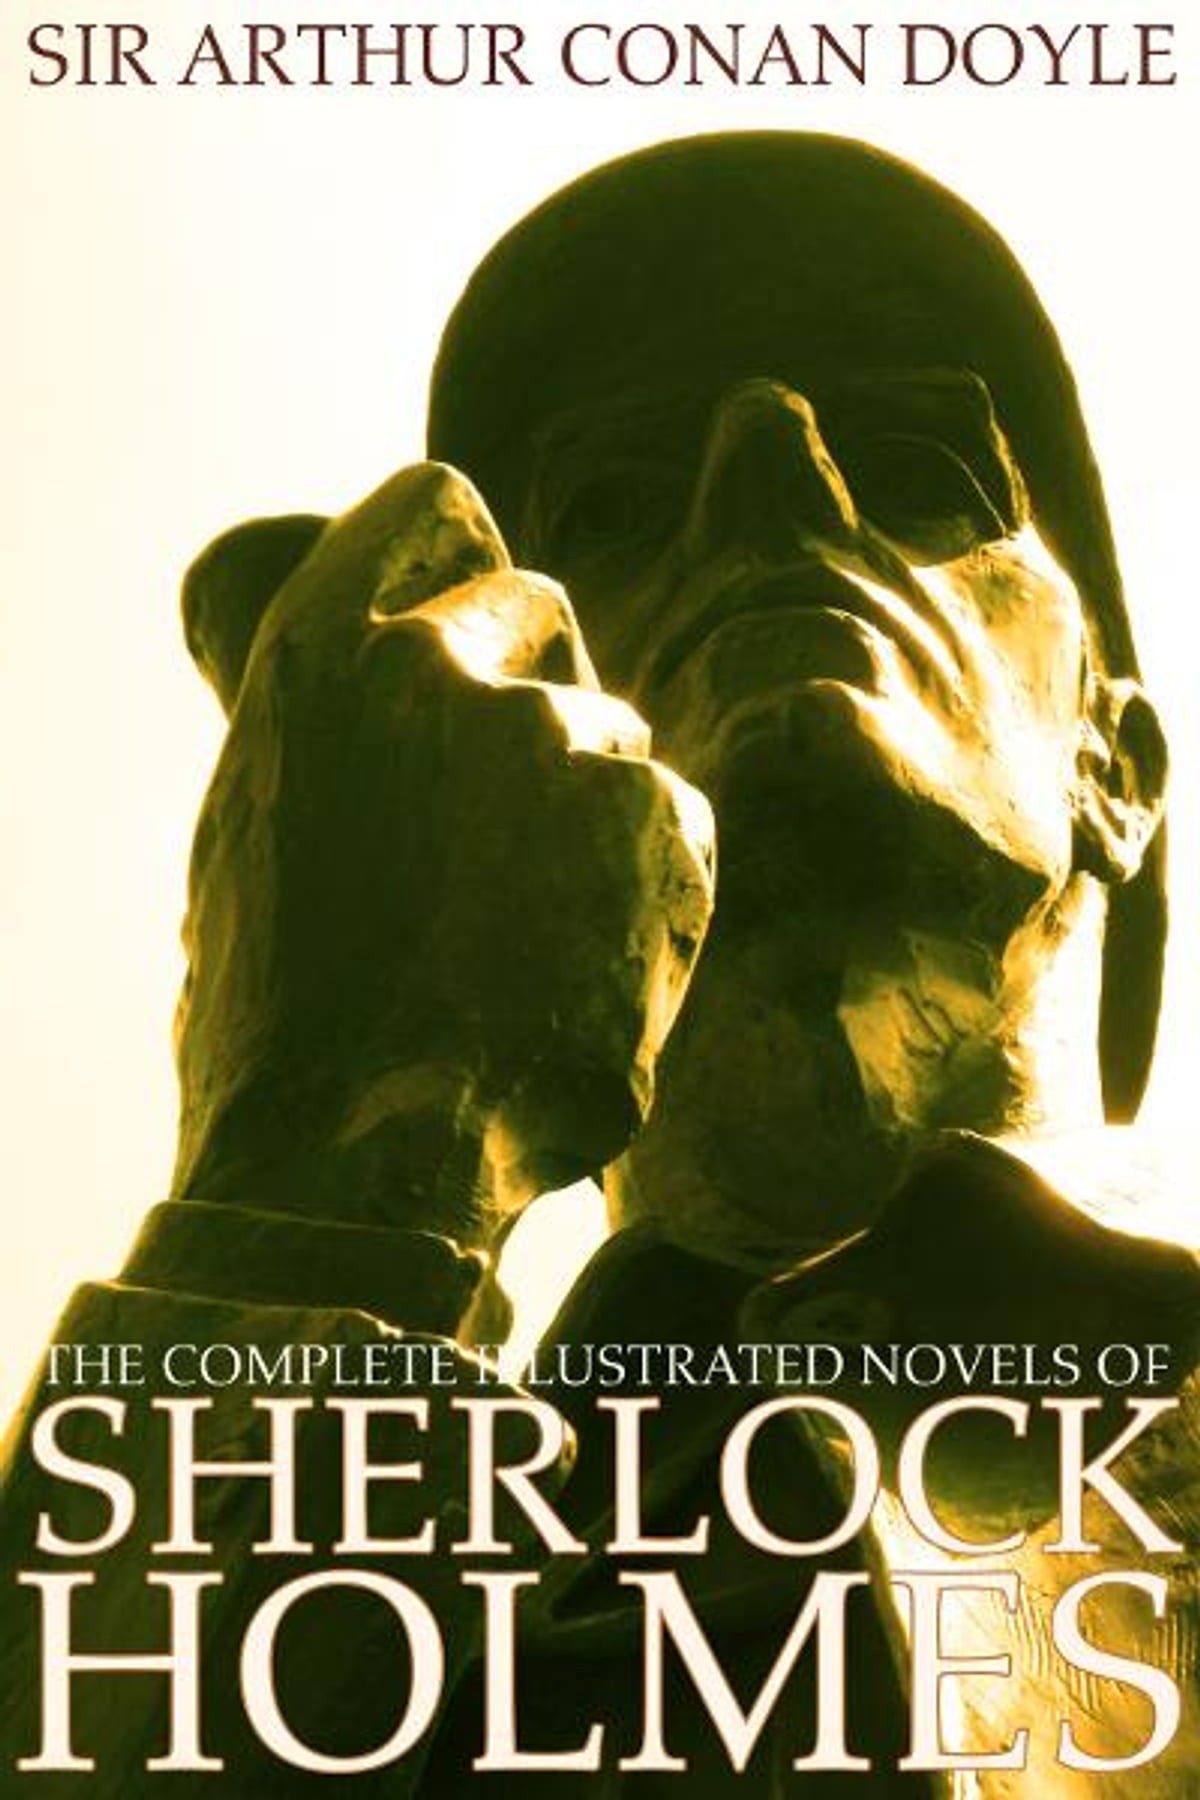 The Complete Illustrated Novels of Sherlock Holmes: A Study in Scarlet, the Sign of the Four, the Hound of the Baskervilles & the Valley of Fear